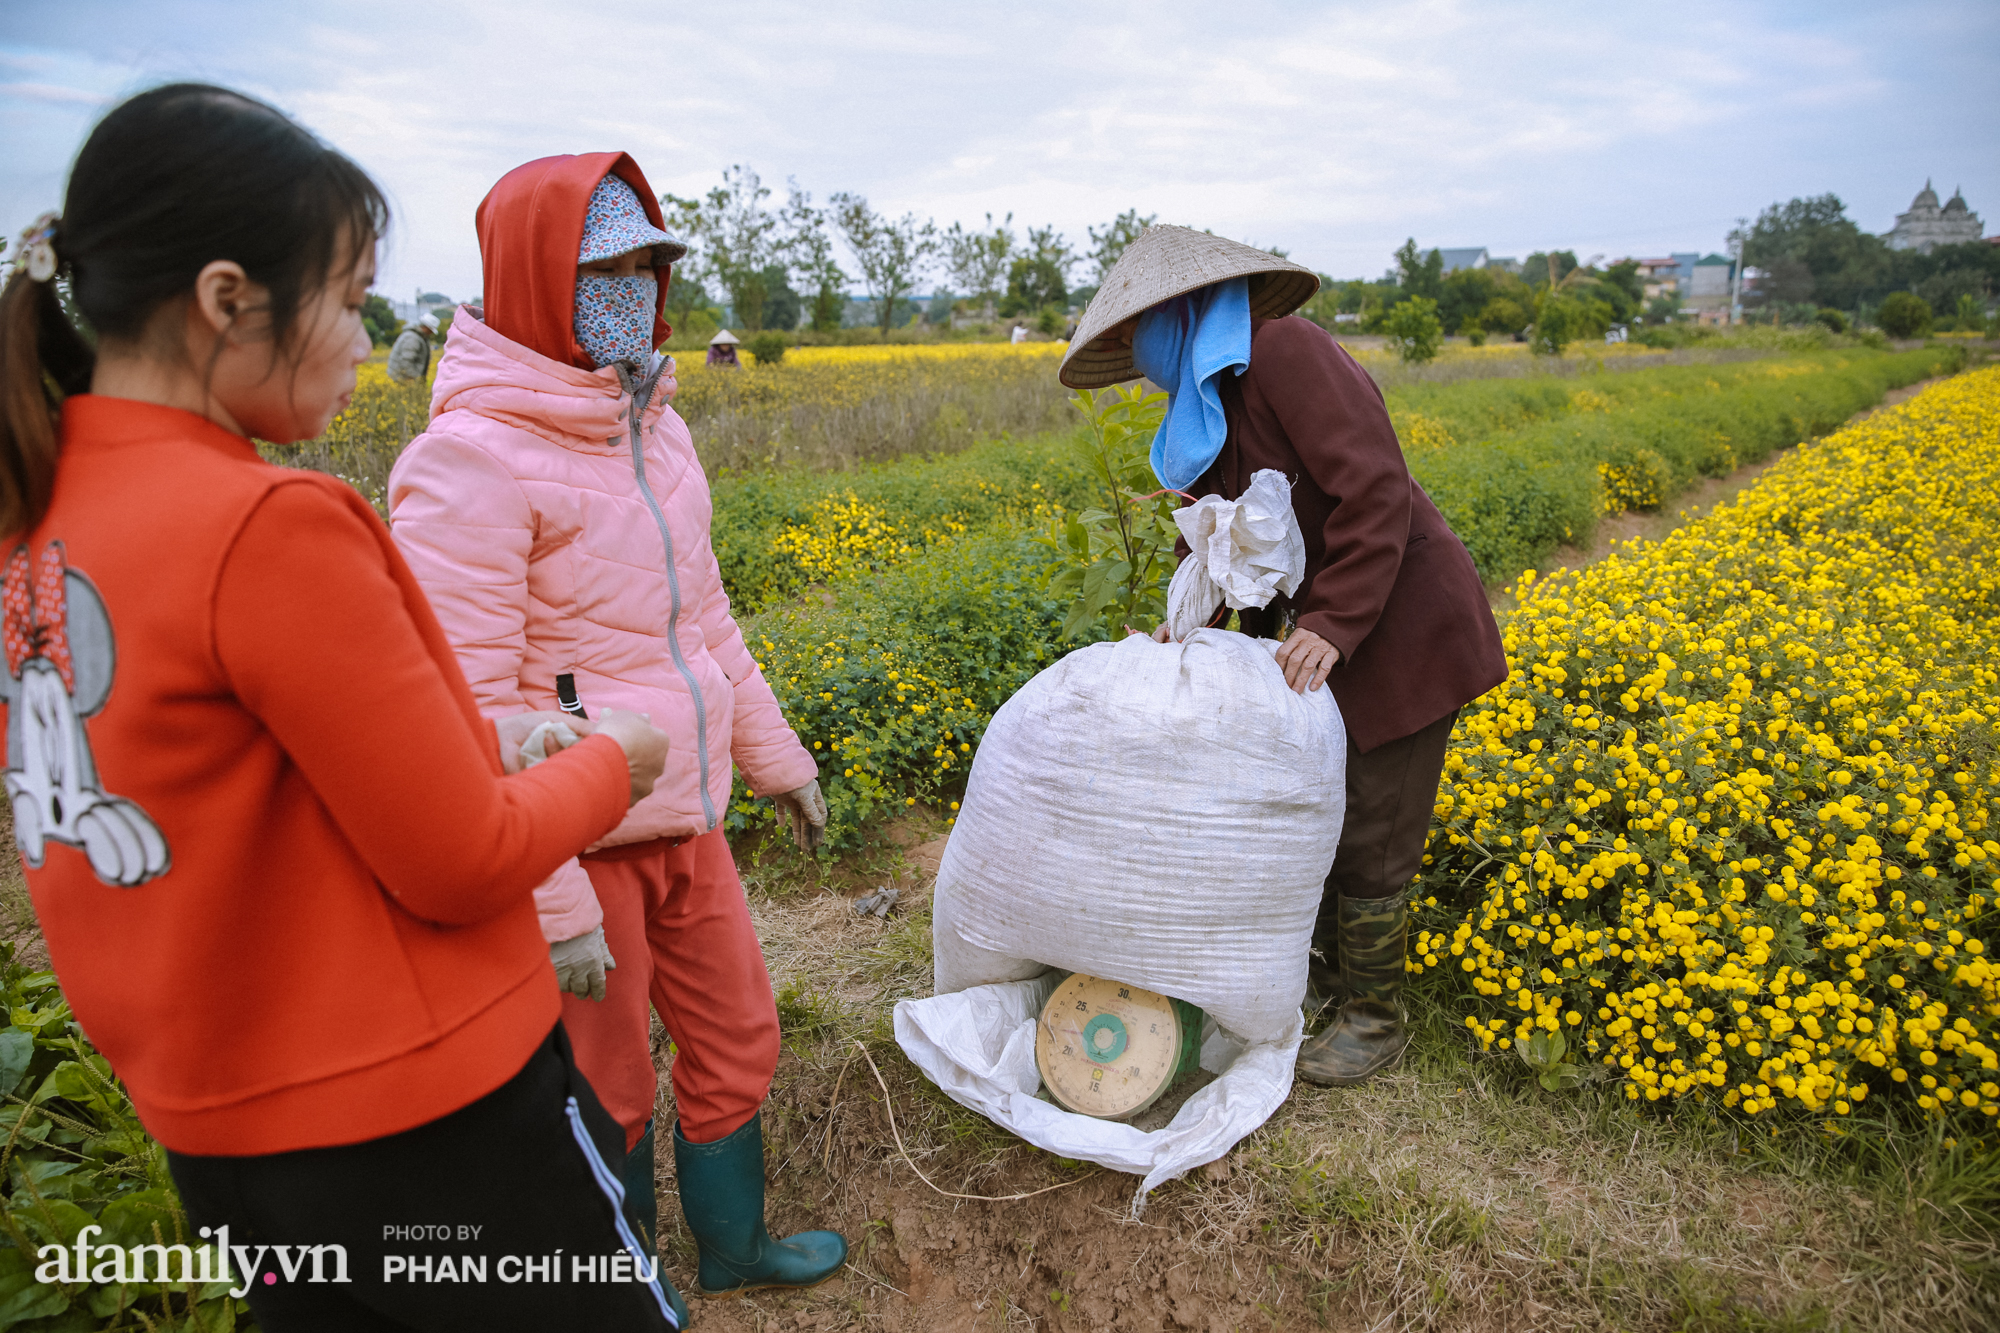 Visit a hundred-year village near Hanoi, possessing the "kingly" chrysanthemum fields  golden, making people everywhere pouring in to take pictures - Photo 12.